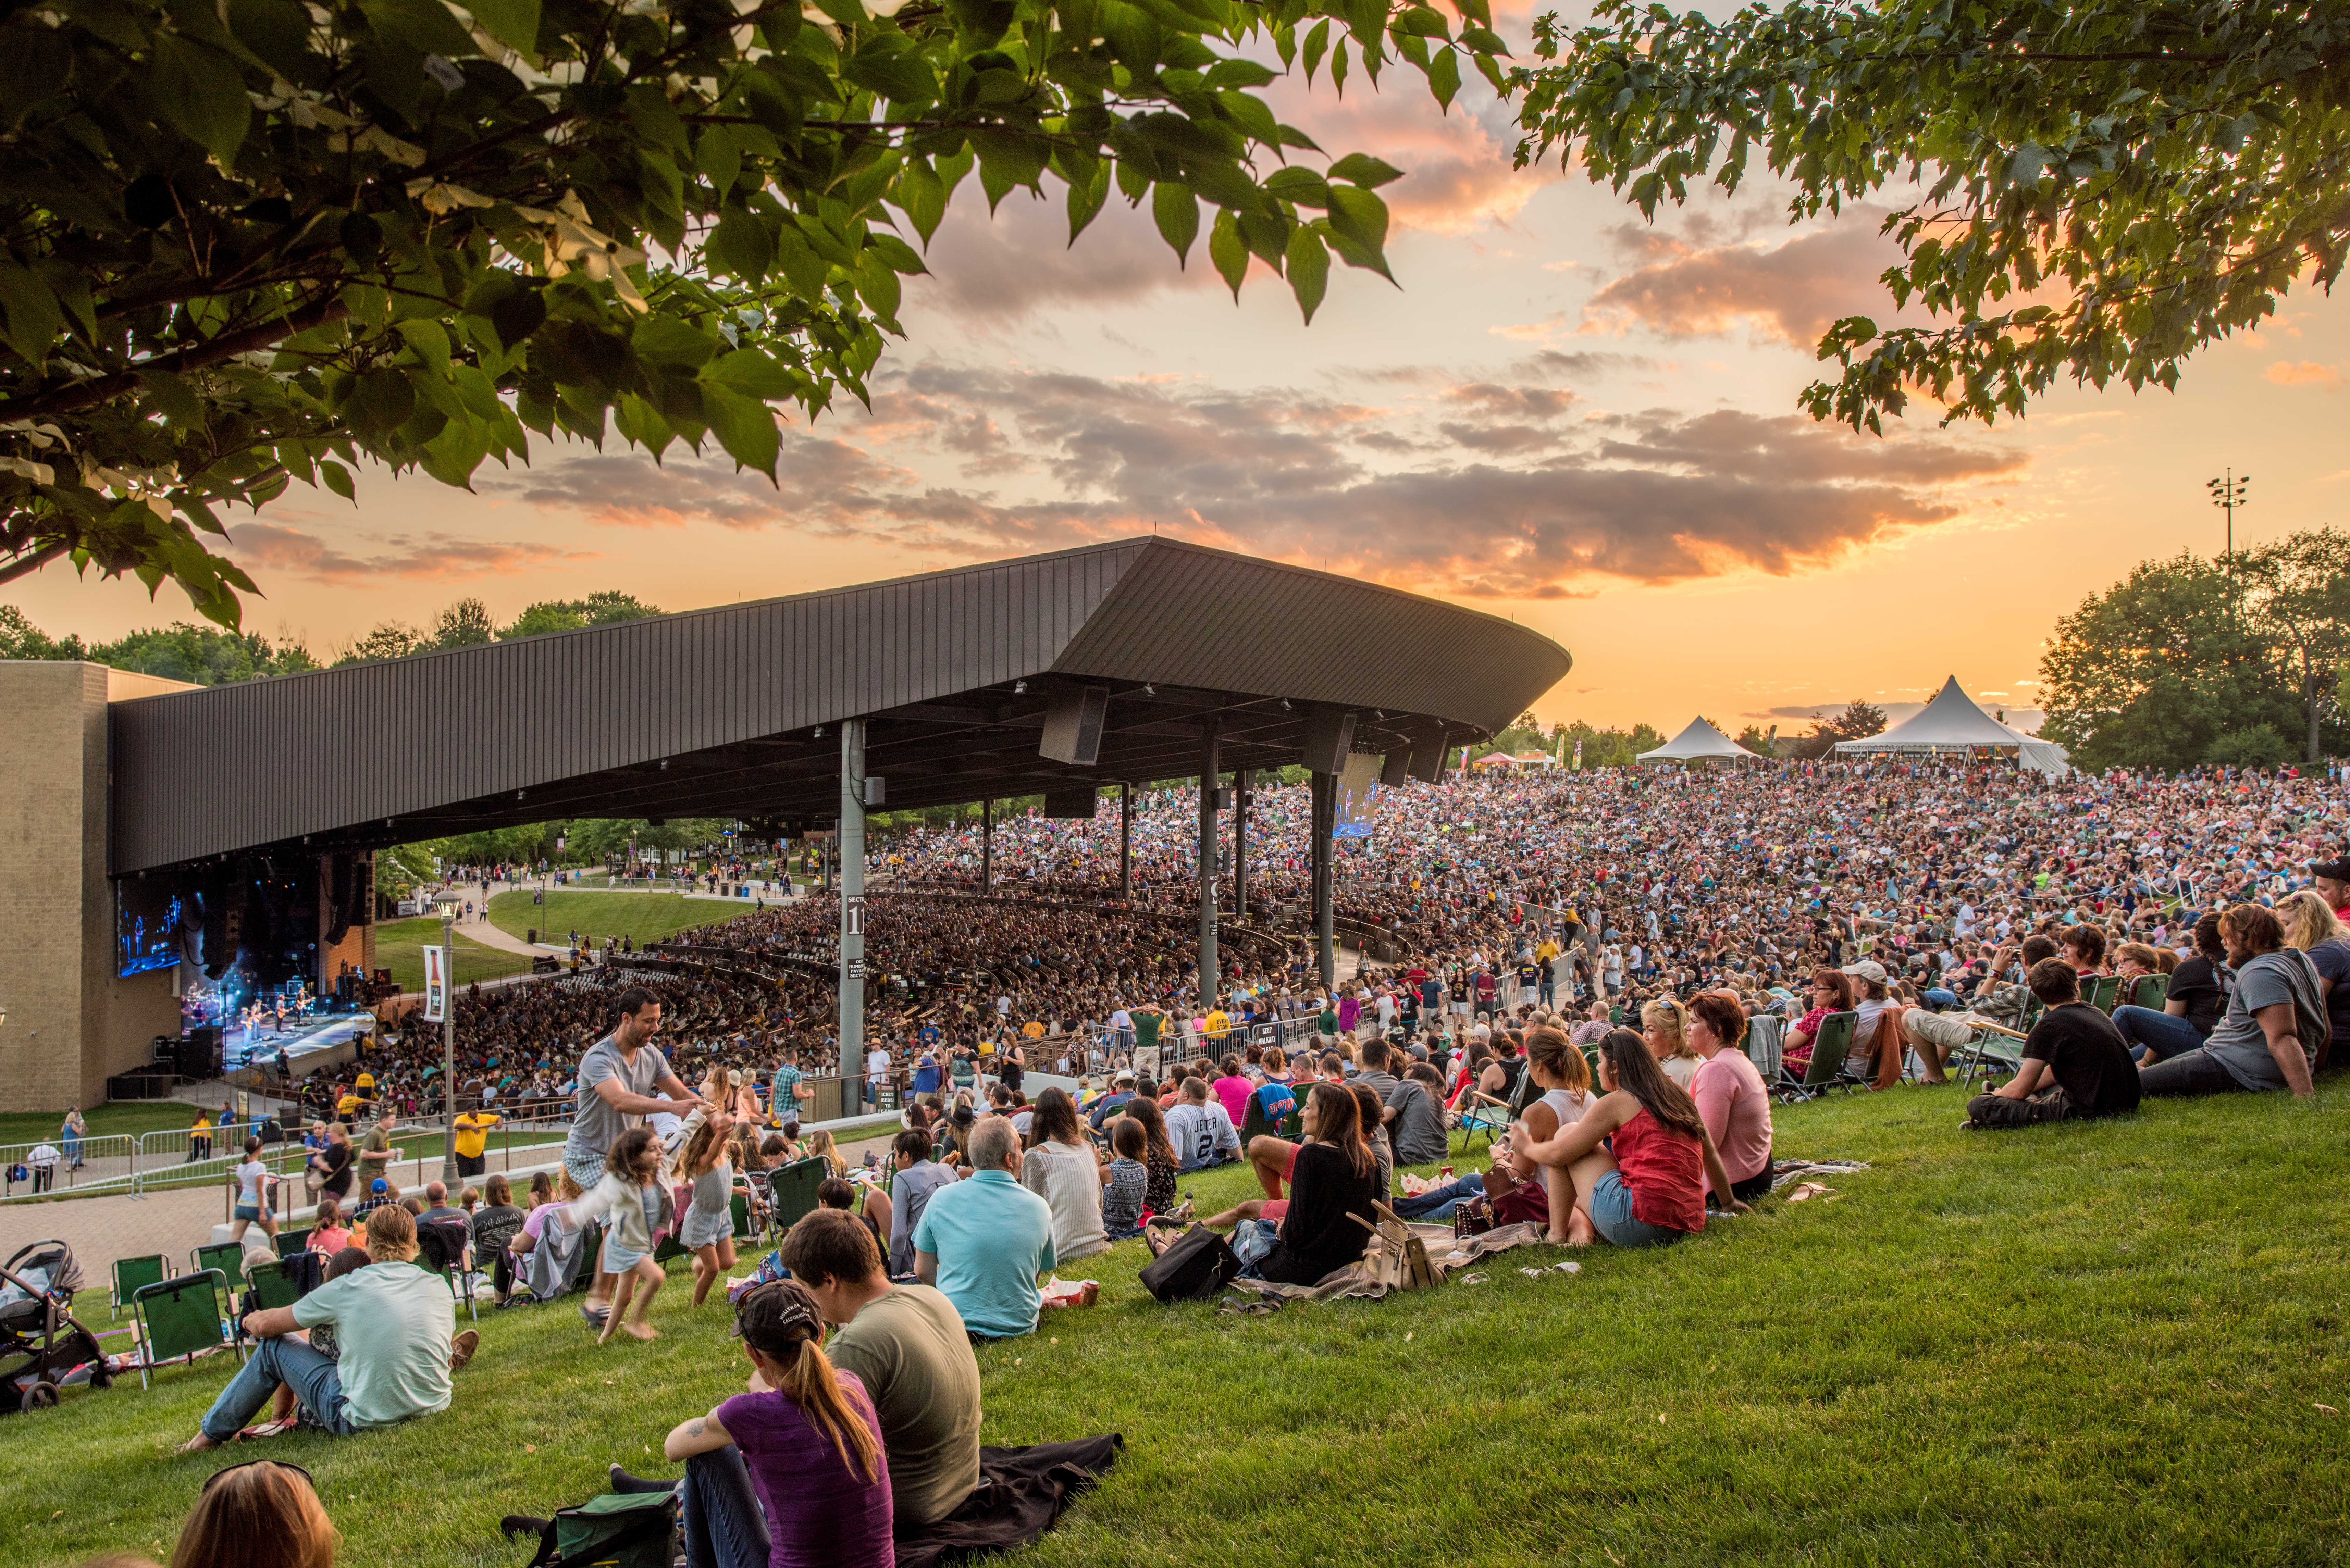 Journey, Dave Mason and The Doobie Brothers perform at Bethel Woods Center for the Arts.